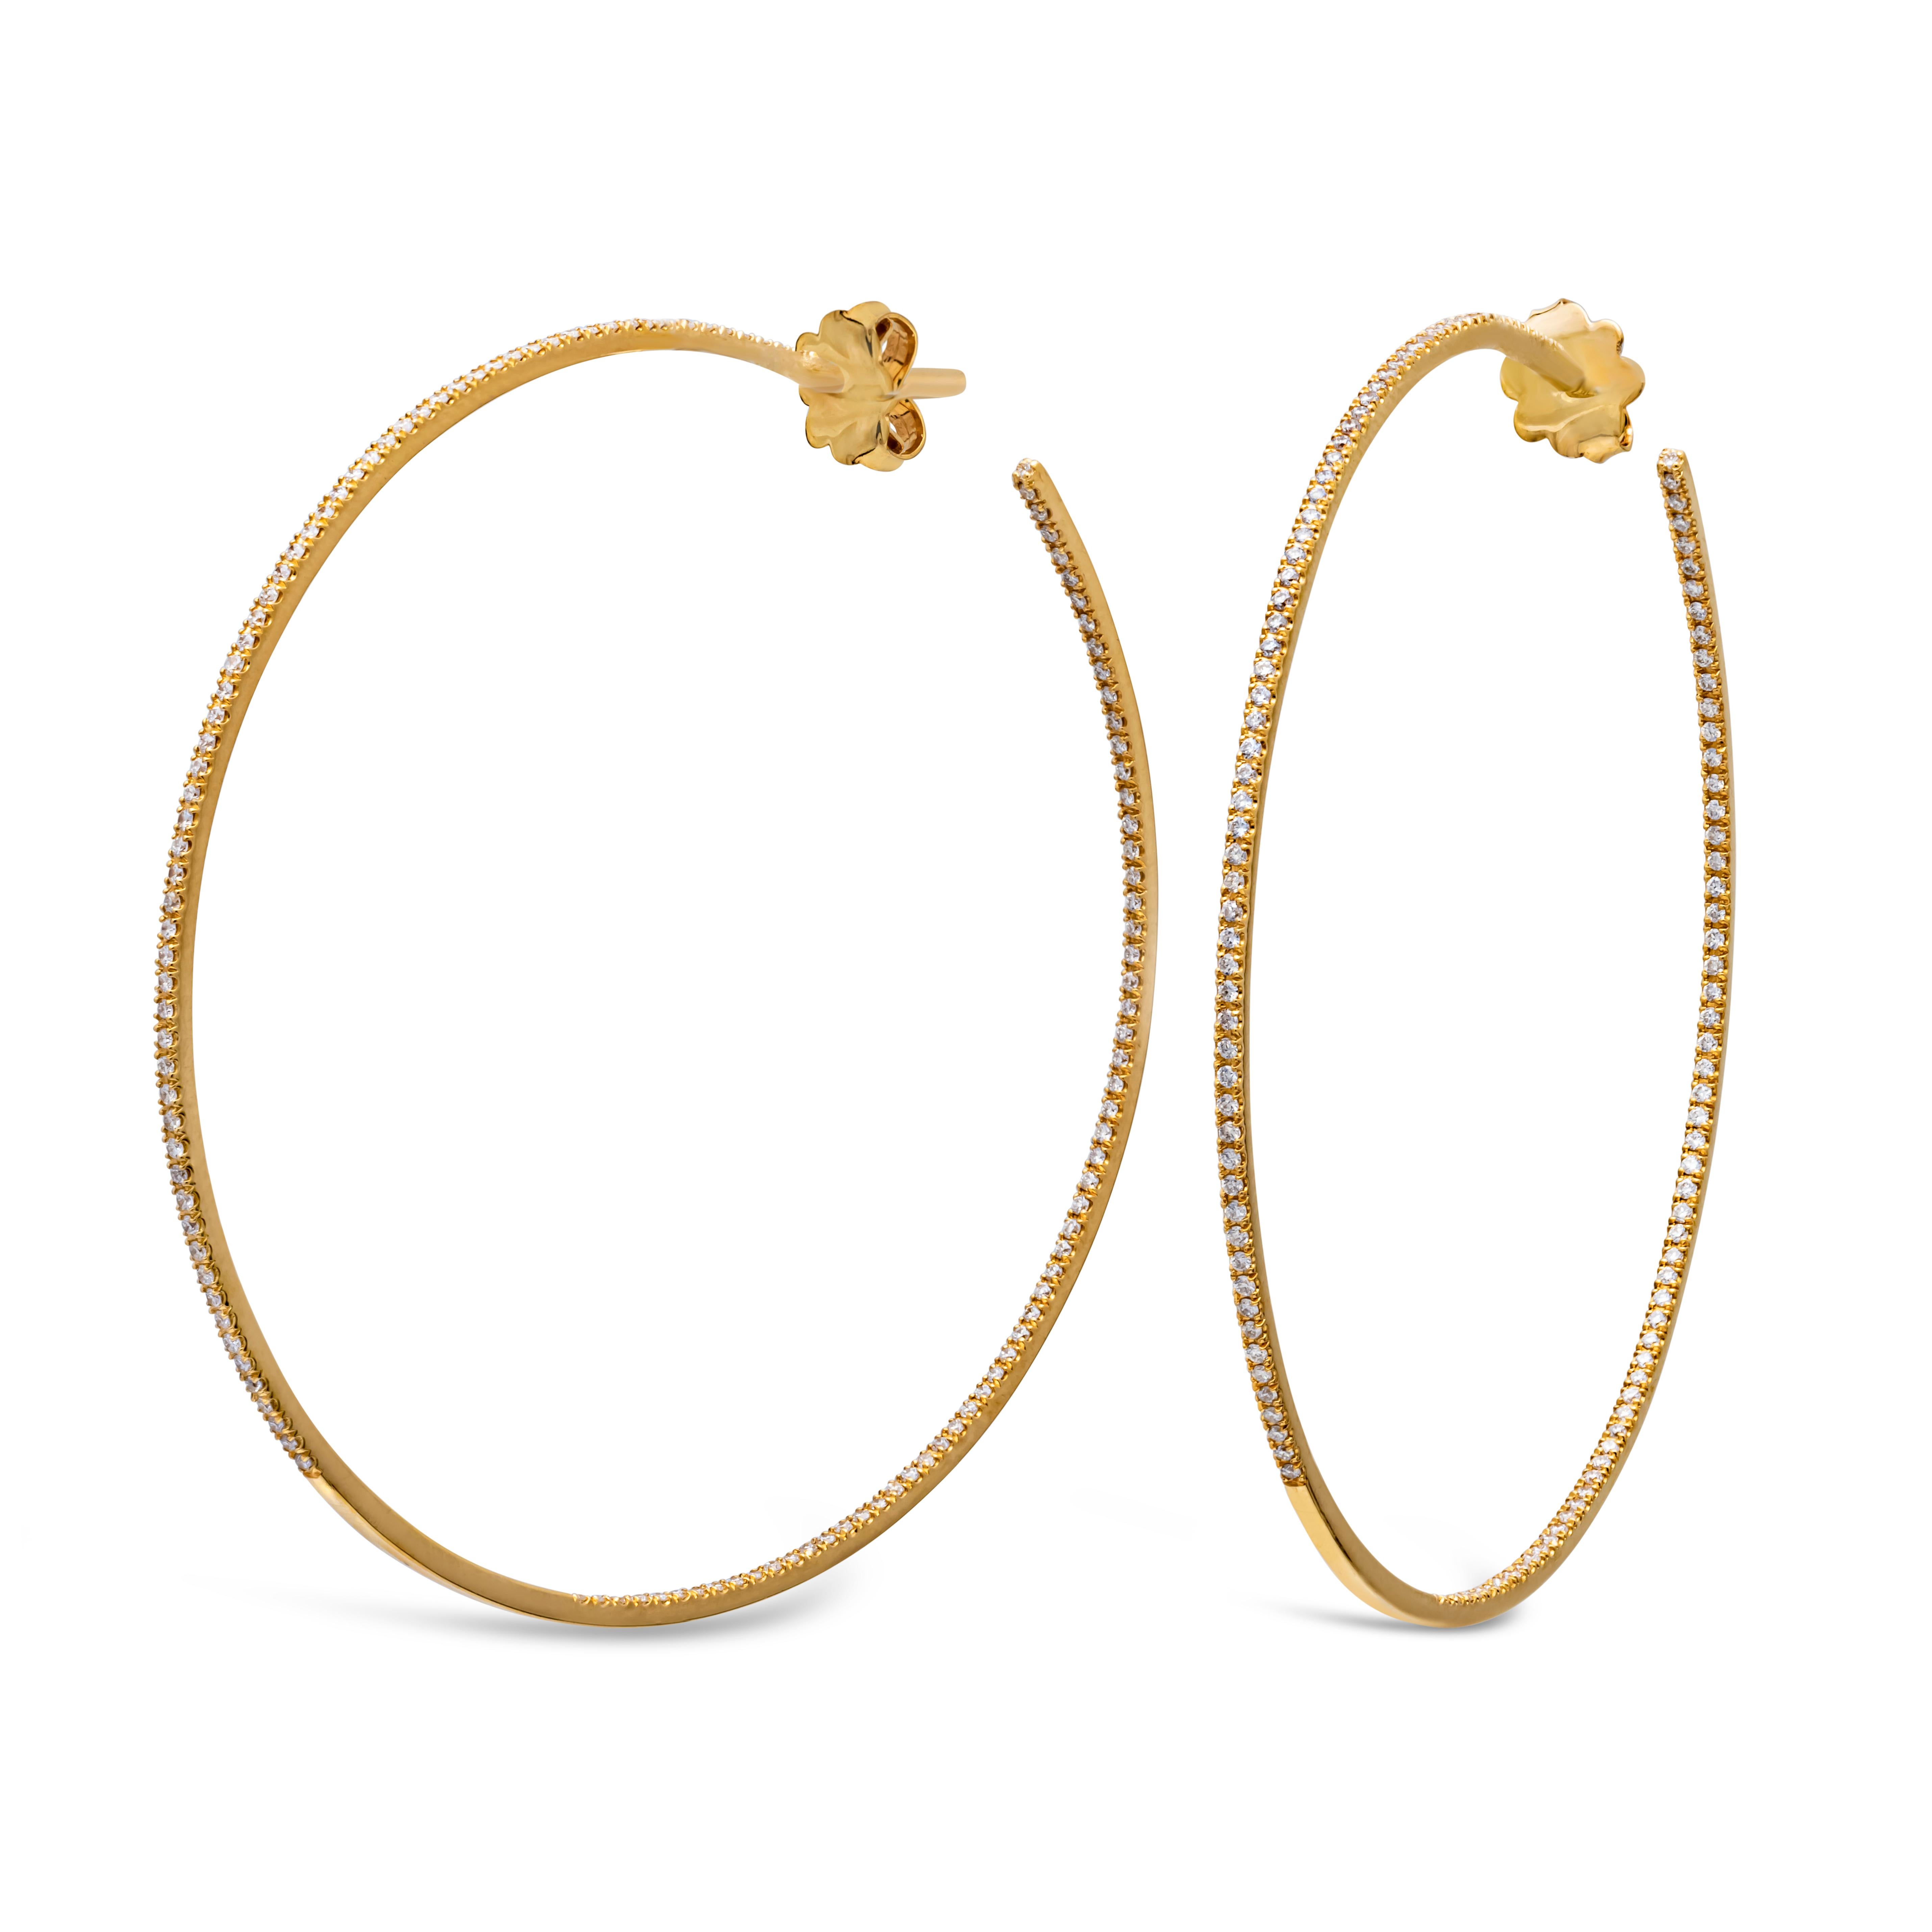 A fashionable and stunning large hoop earrings showcasing a row of 280 round brilliant diamonds, set inside and out in a traditional four prong setting weighing 0.58 carats total, F color and VS-SI1 in clarity. Finely made in 18k yellow gold and